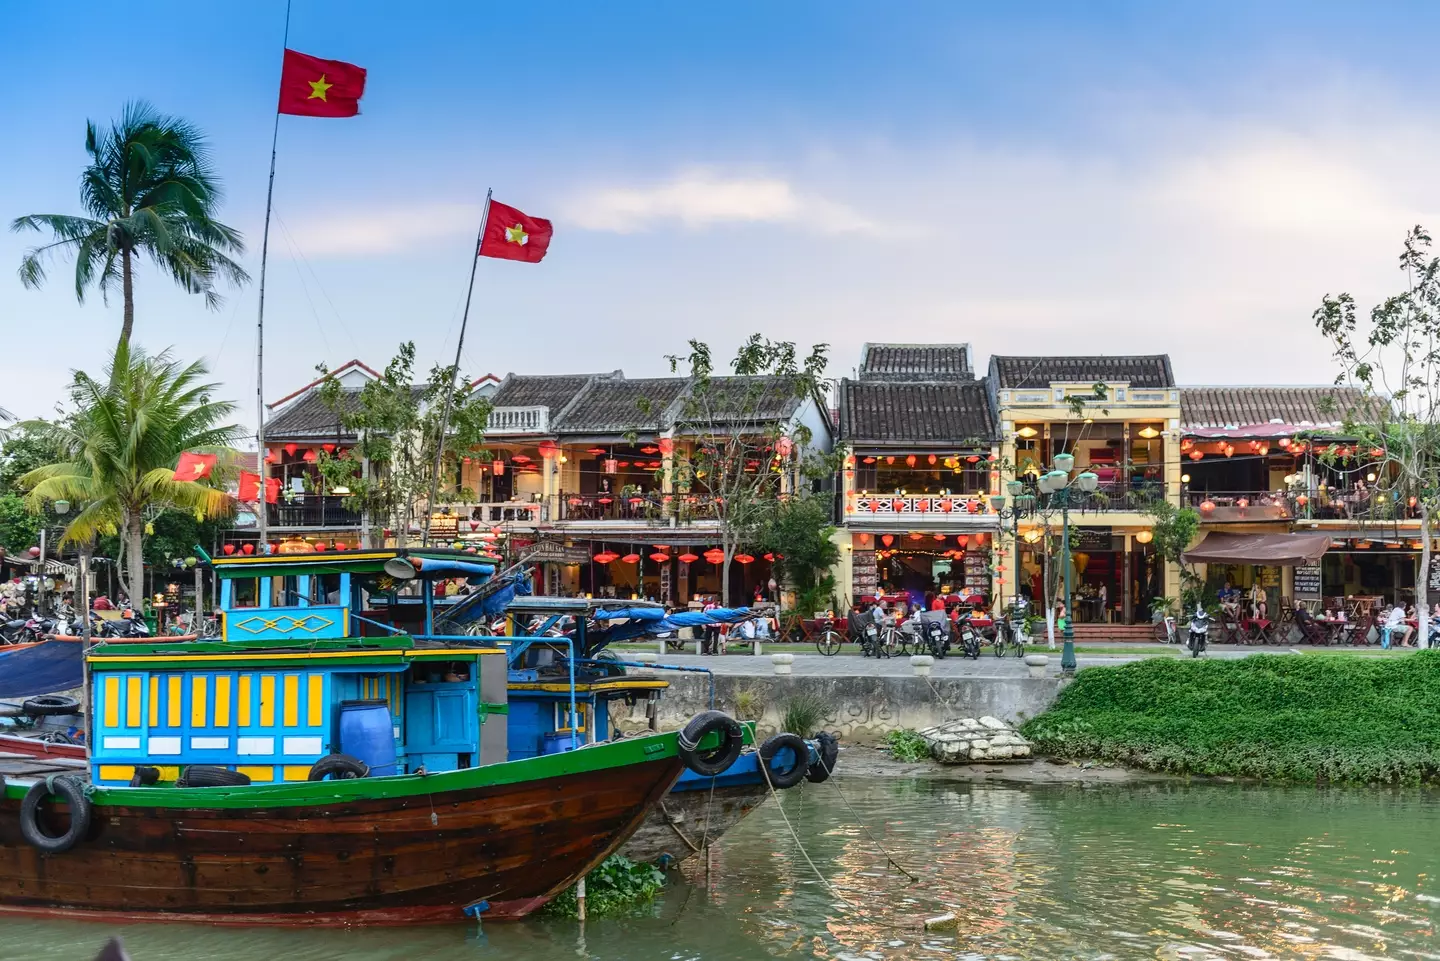 Hoi An in Vietnam is the 'best value' holiday for Brits.